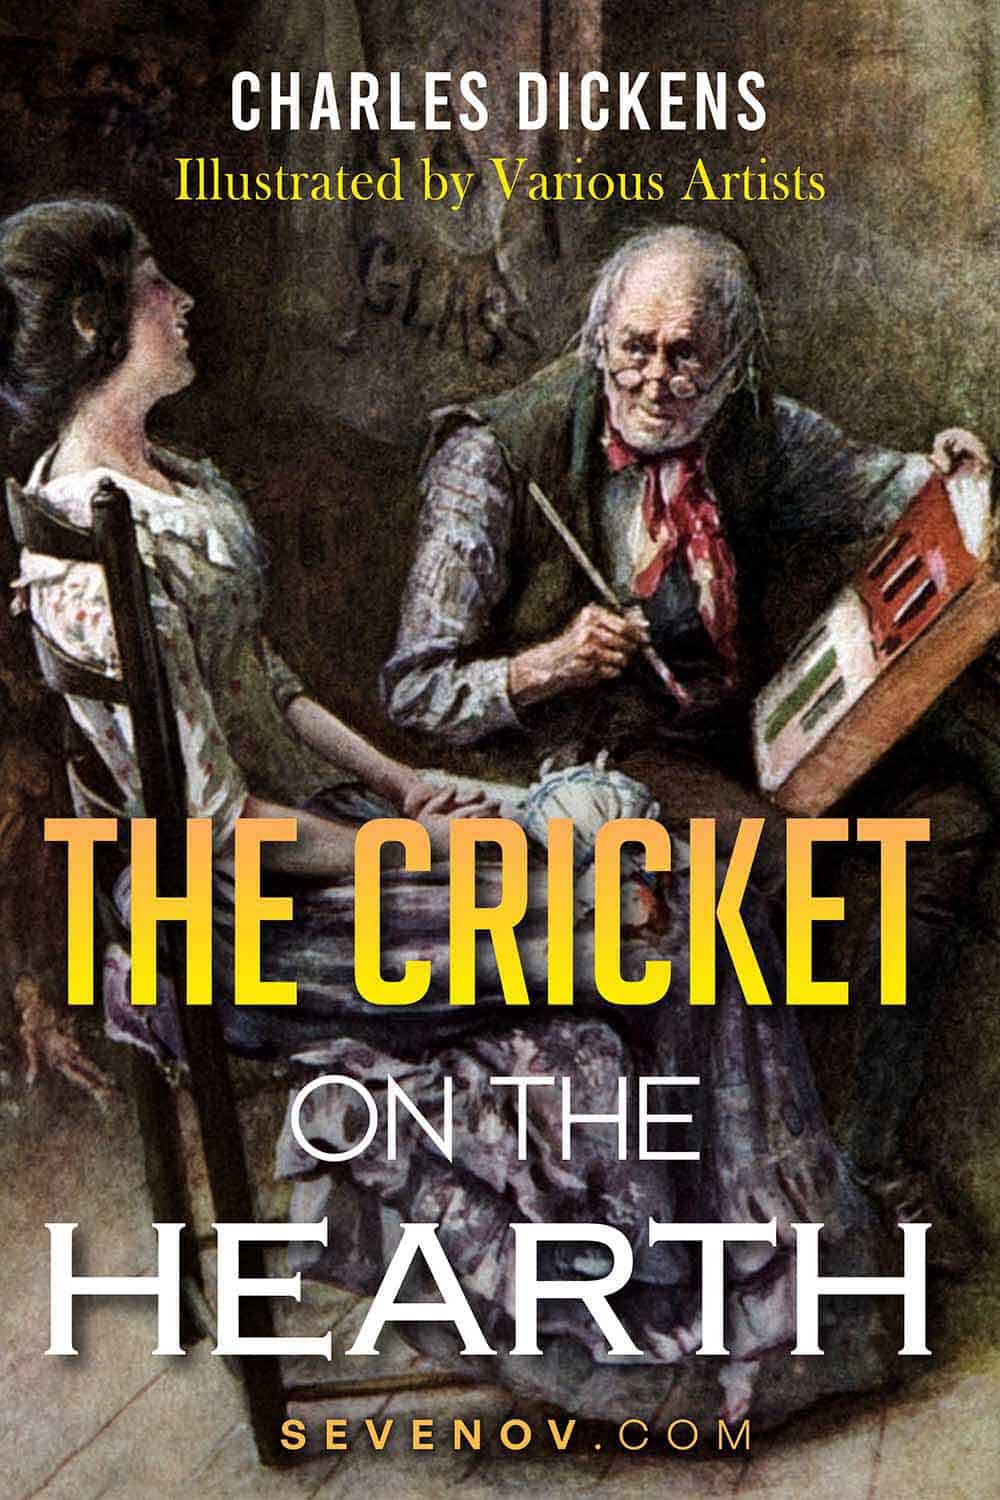 https://pagevio.com/wp-content/uploads/2023/01/the-cricket-on-the-hearth-various-artists-20230103.jpg